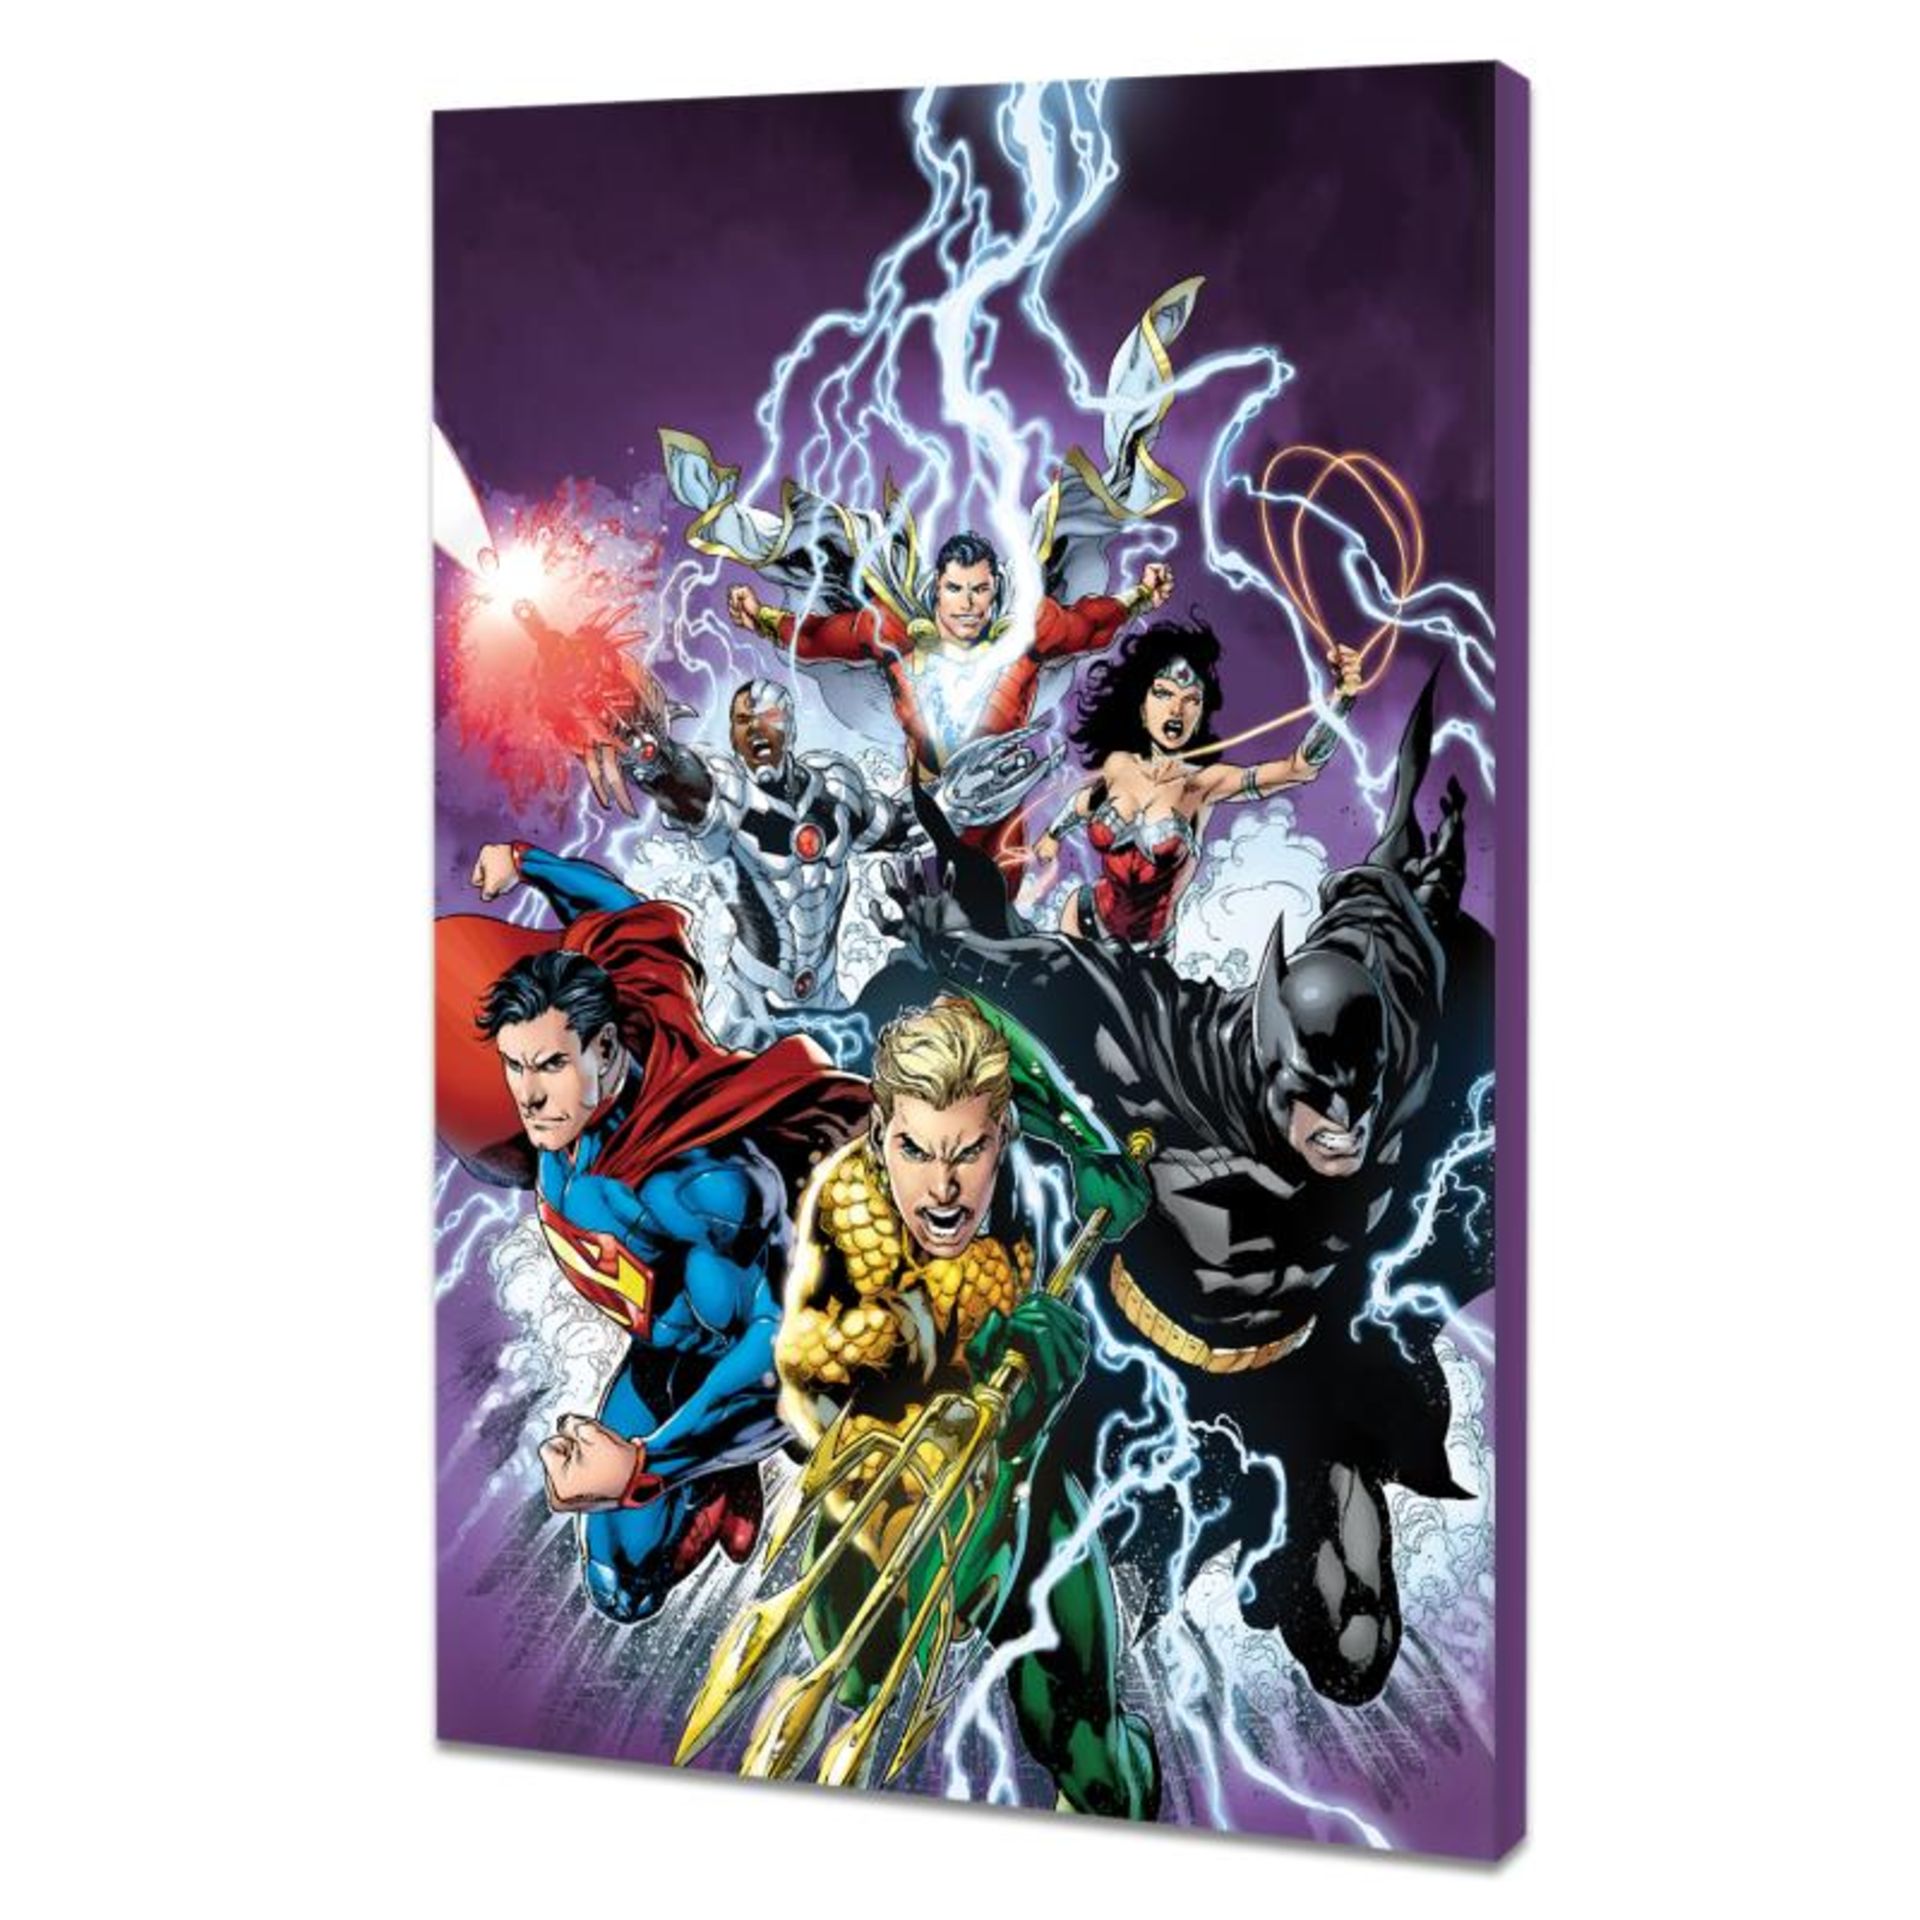 DC Comics, "Justice League #15" Numbered Limited Edition Giclee on Canvas by Iva - Image 3 of 3